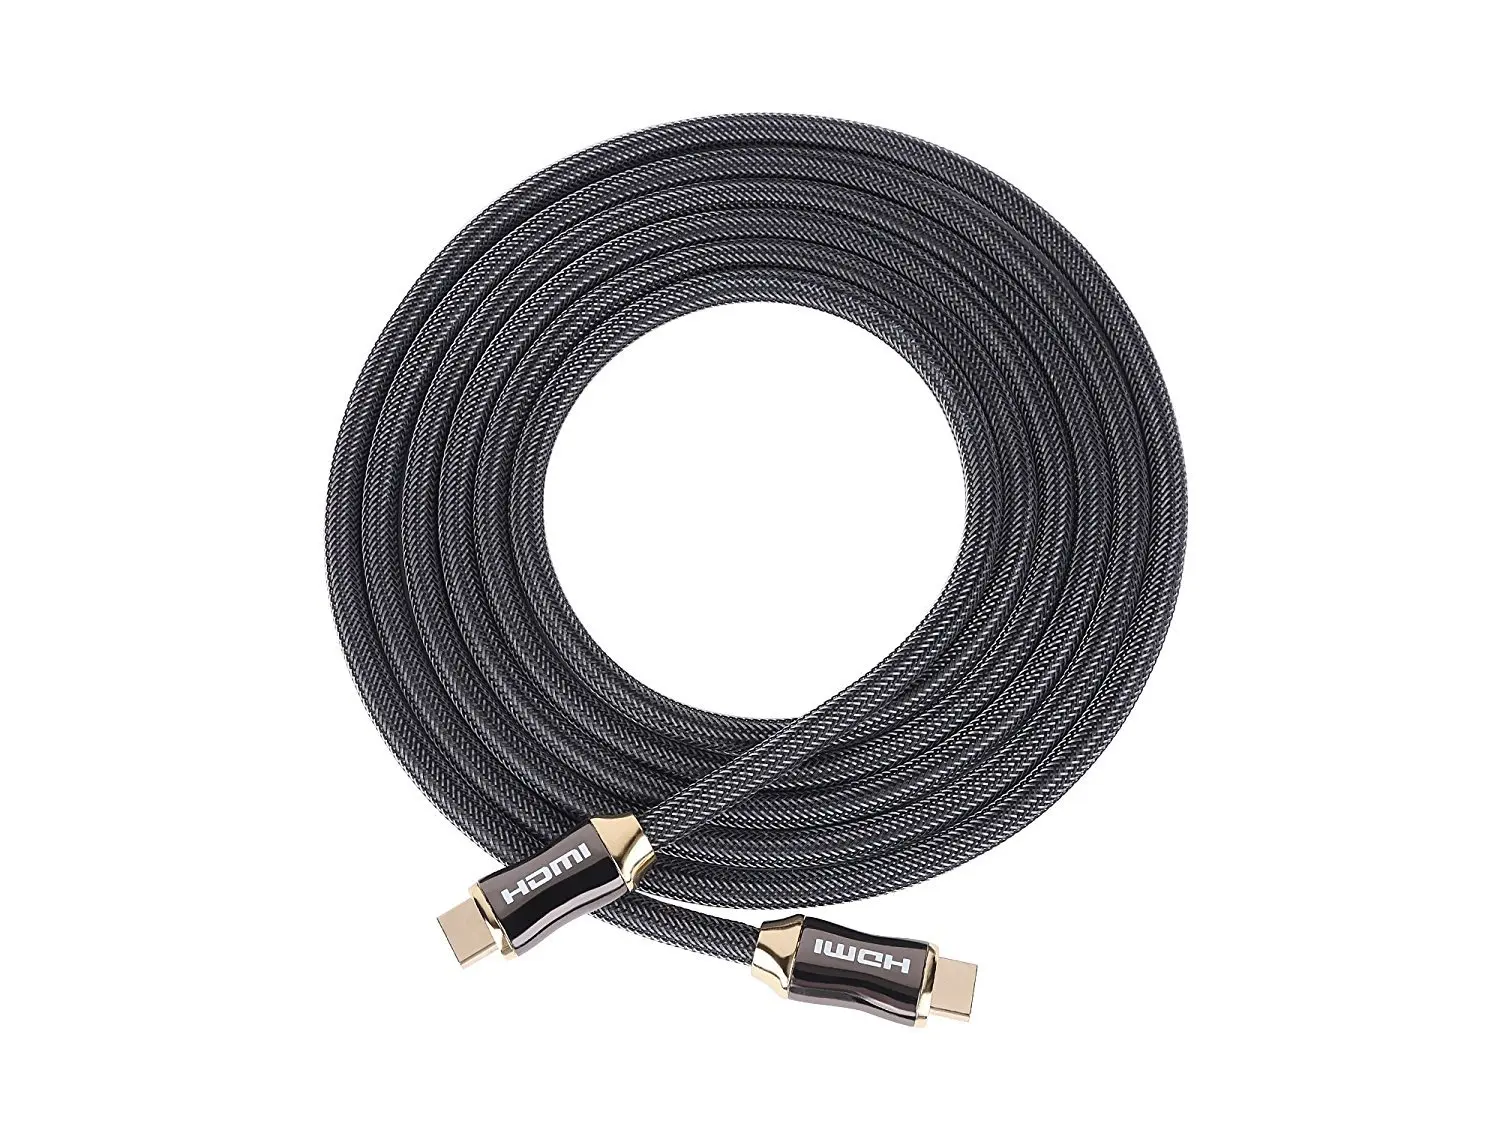 High speed HDMI cable with Ethernet, Premium series, 3 m (CCBP-HDMI-3M)